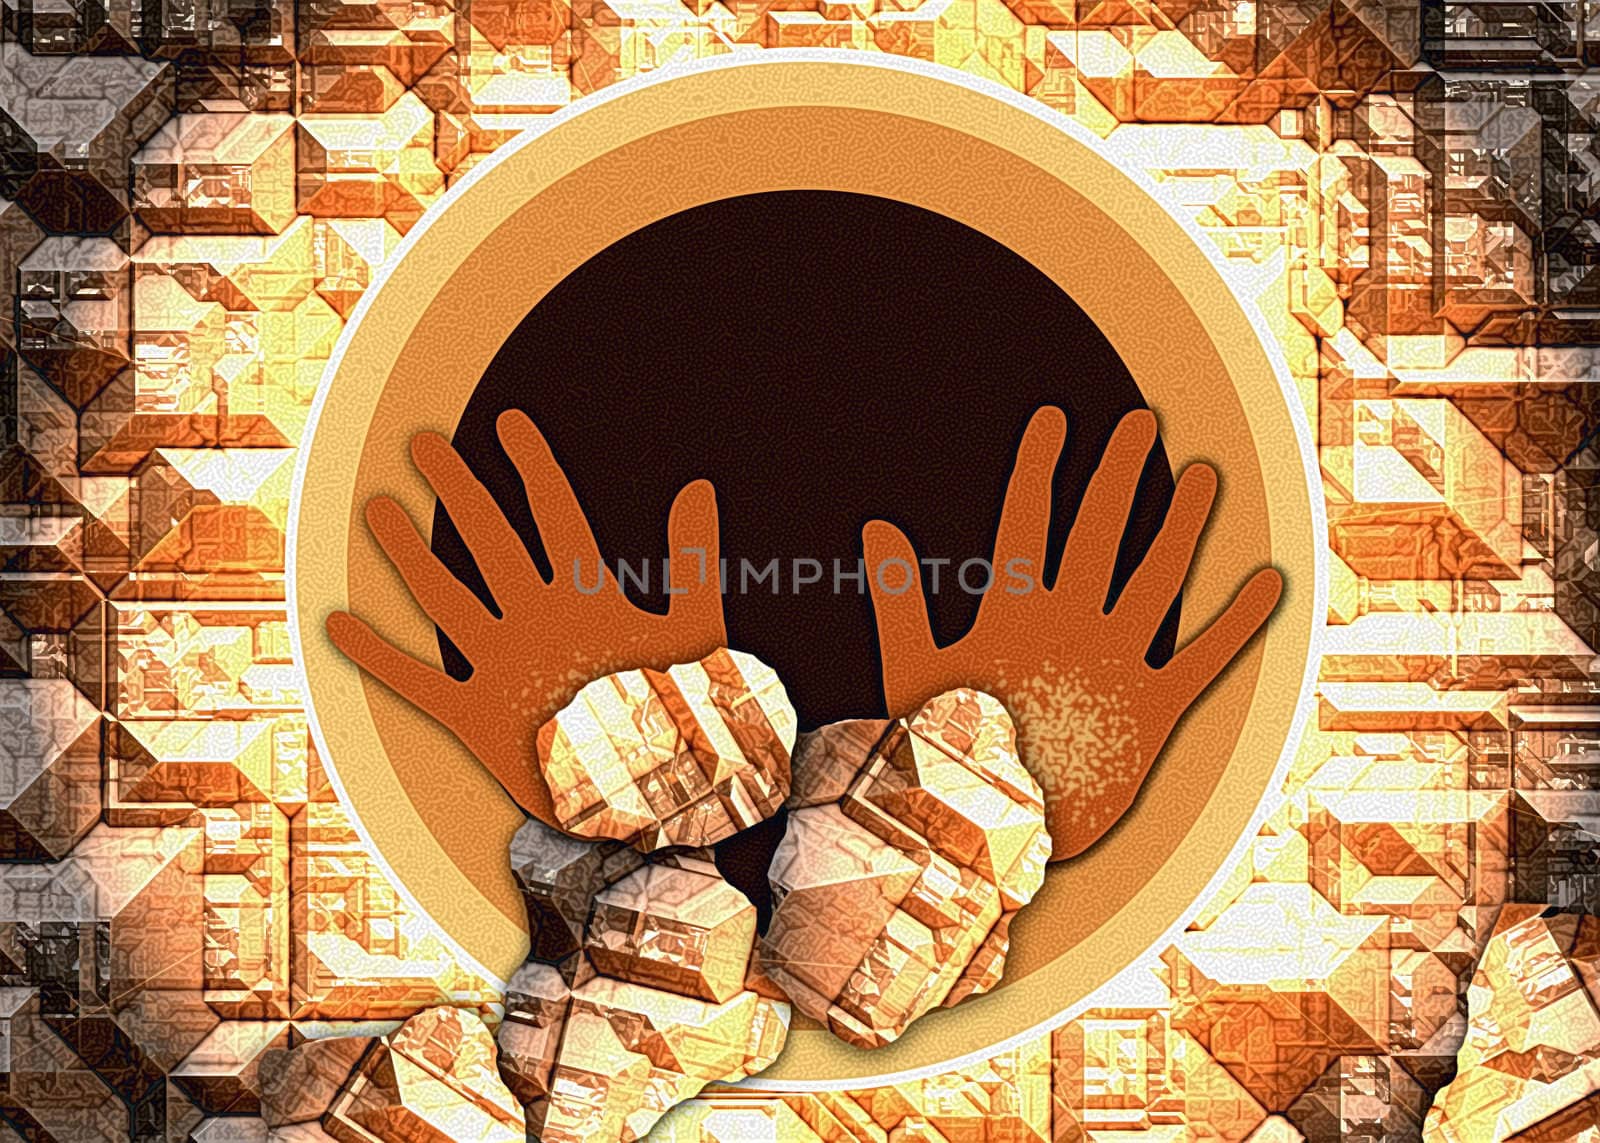 abstract symbolic image of the gold mines